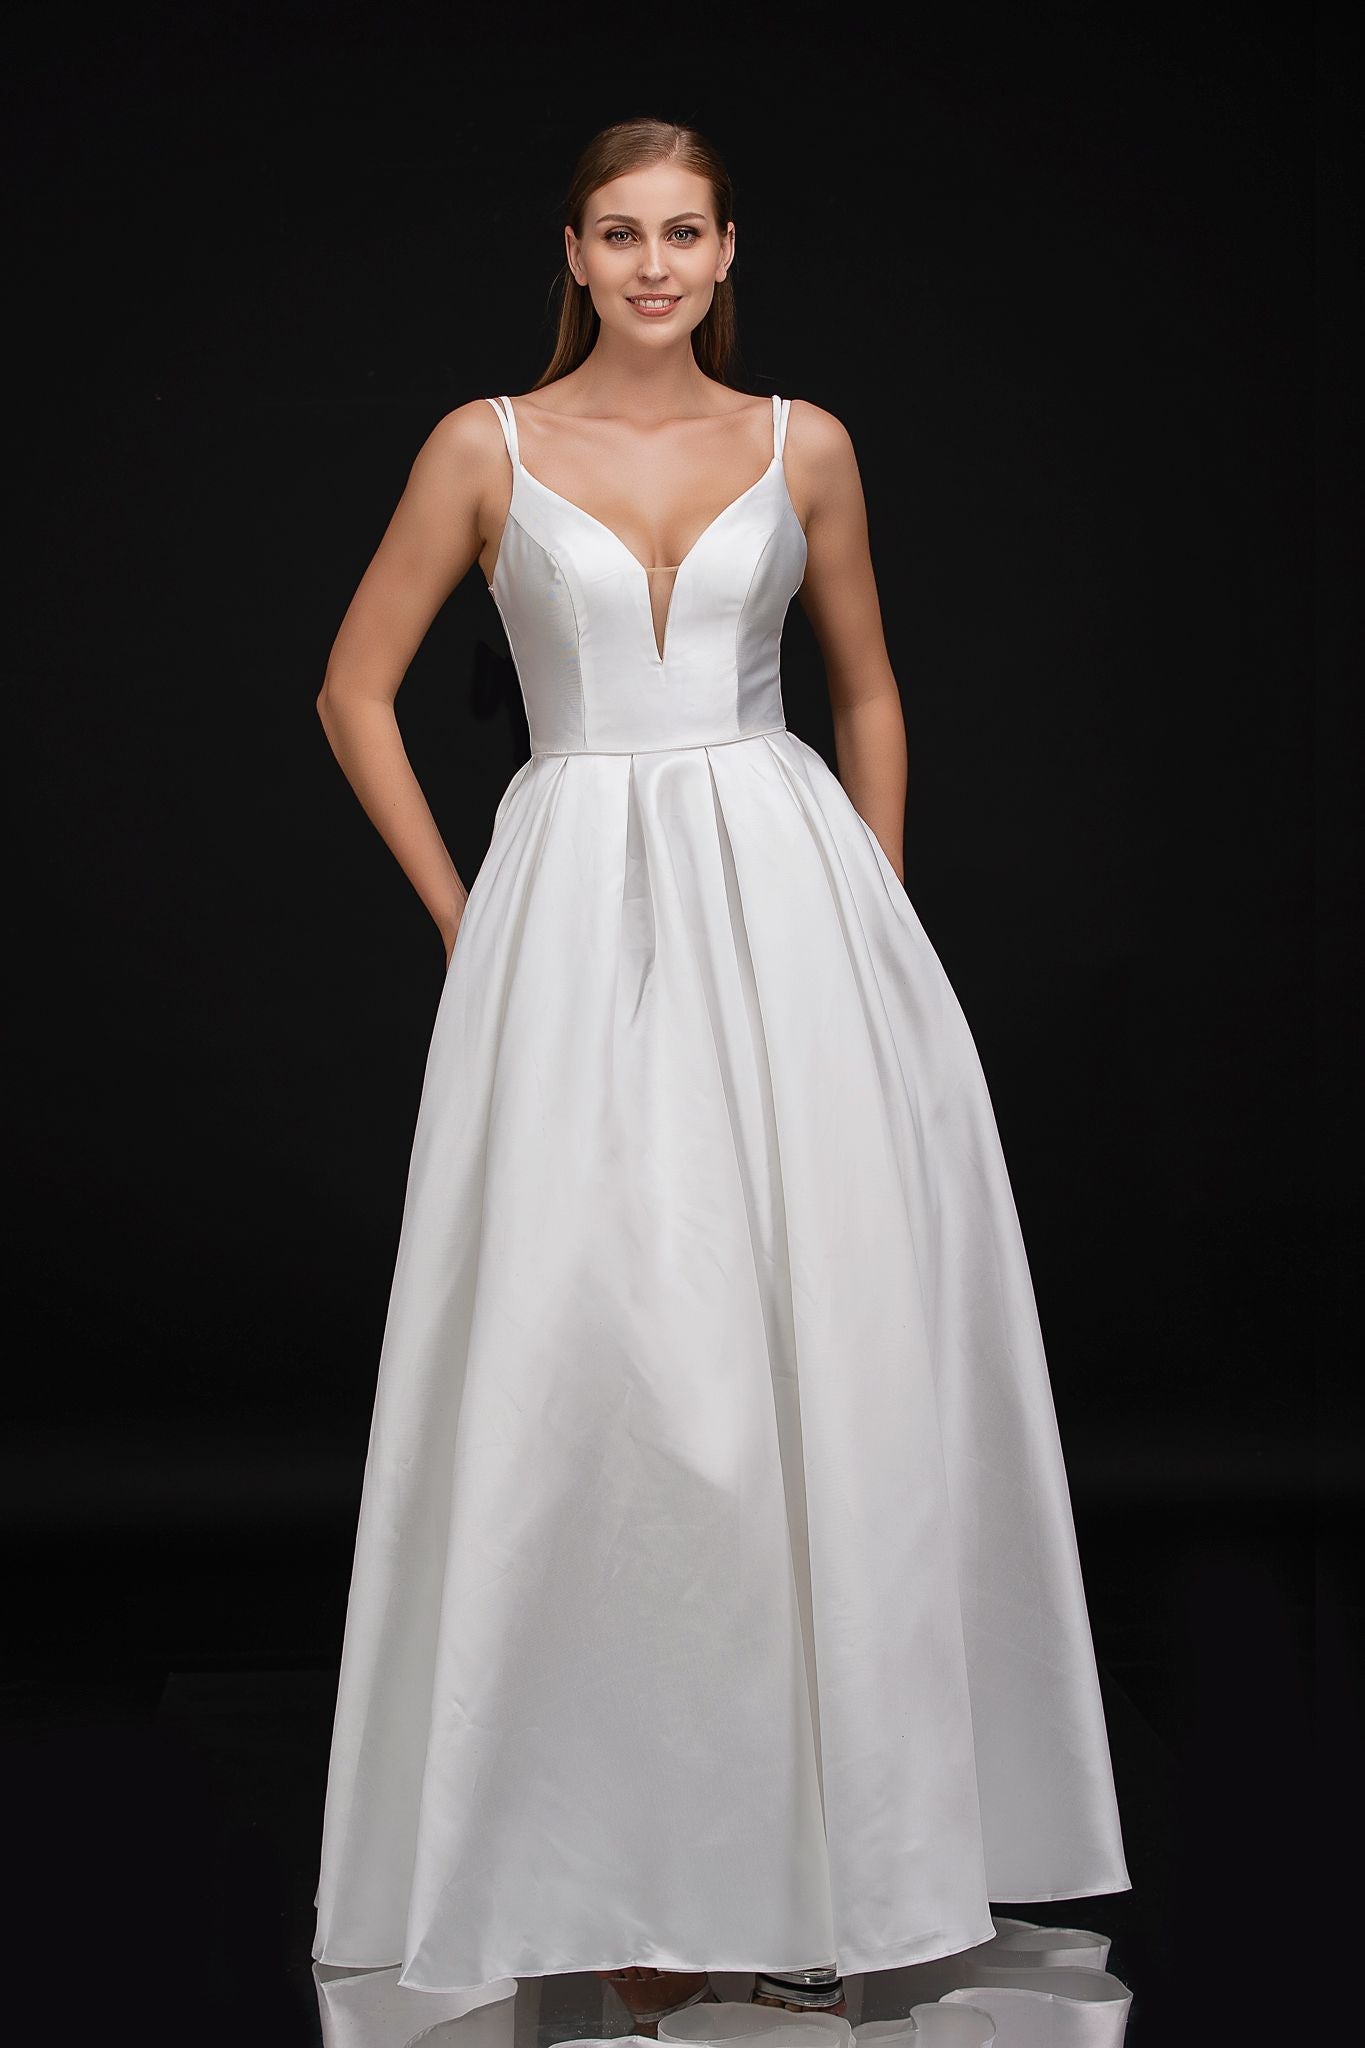 Nina Canacci B1900 plunging V neckline with mesh panel satin prom dress evening gown with double straps that lead to a bow in the lower back at the waistline and flows into a satin A line skirt   Color Diamond White  Sizes 0, 2, 4, 6, 8, 10, 12, 14, 16, 18, 20, 22, 24 